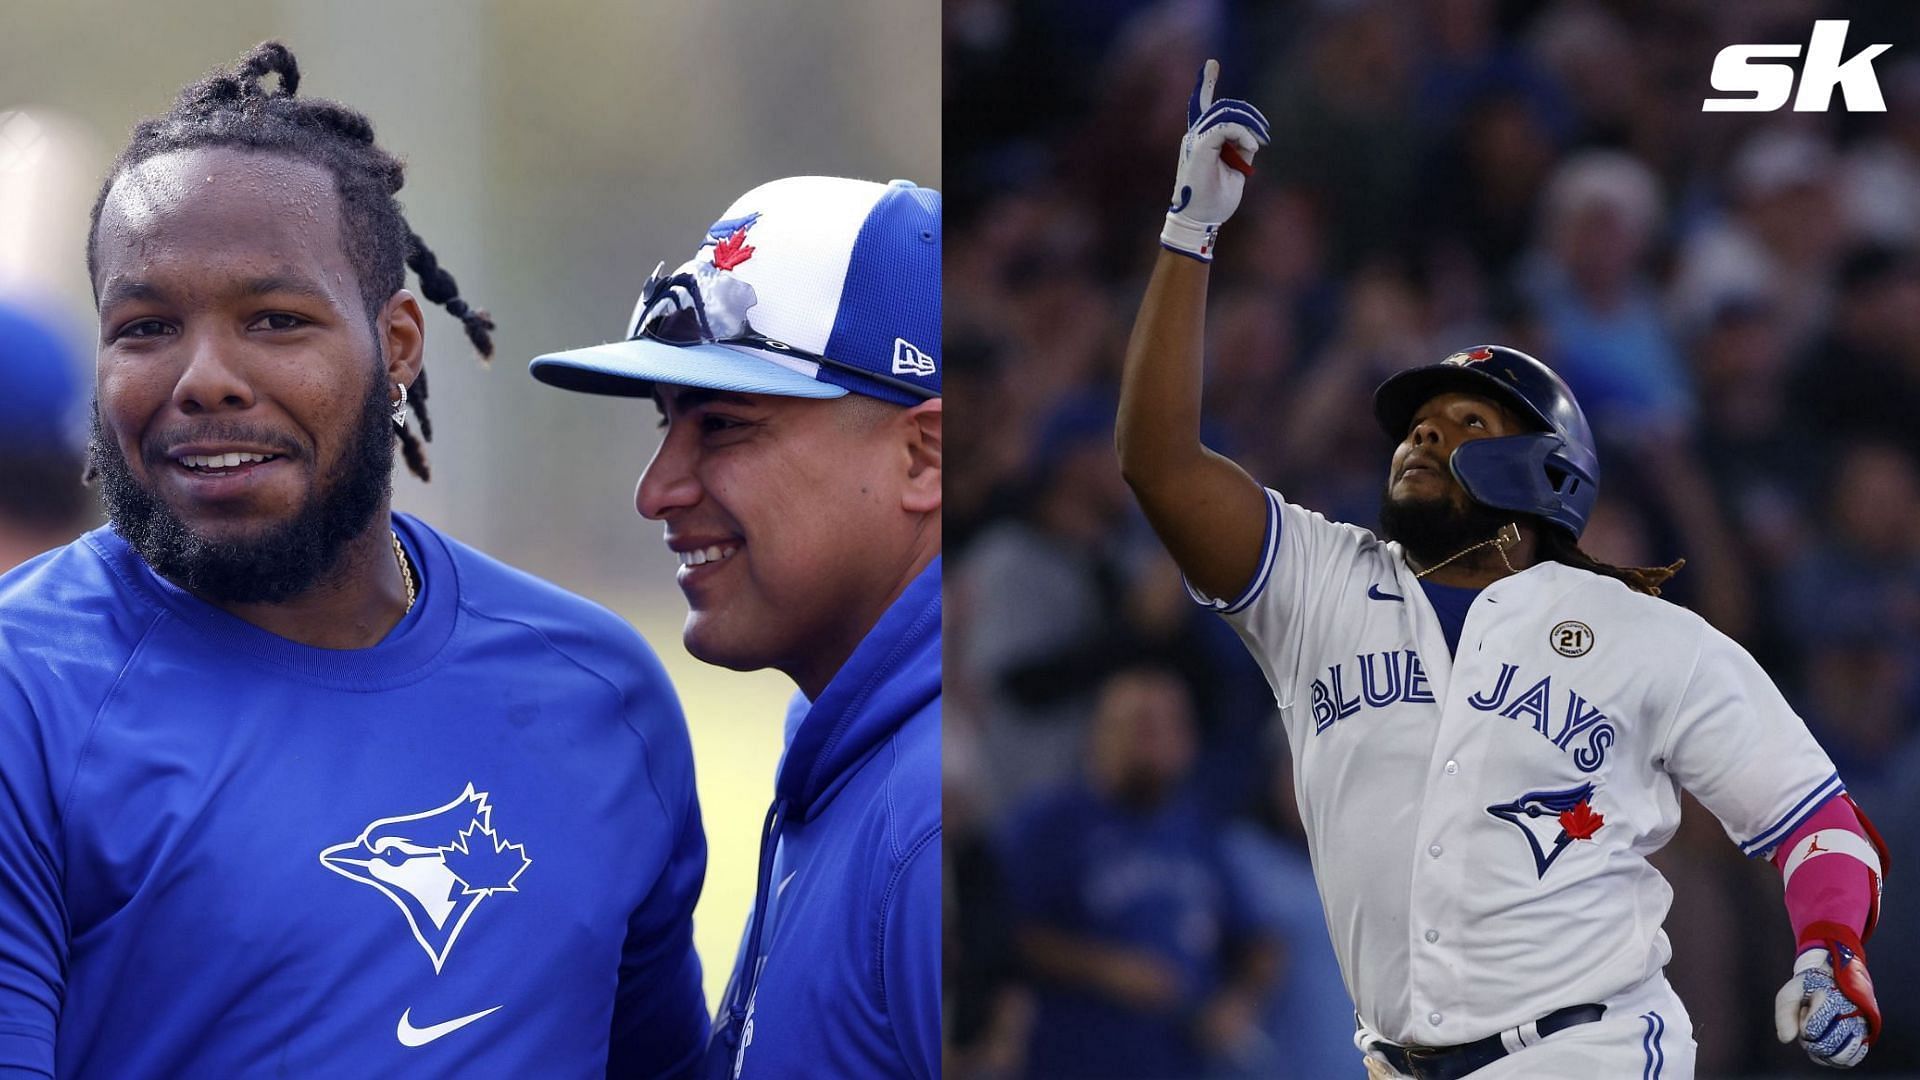 Vladimir Guerrero Jr. tied the game for the Blue Jays with massive 459-foot home run